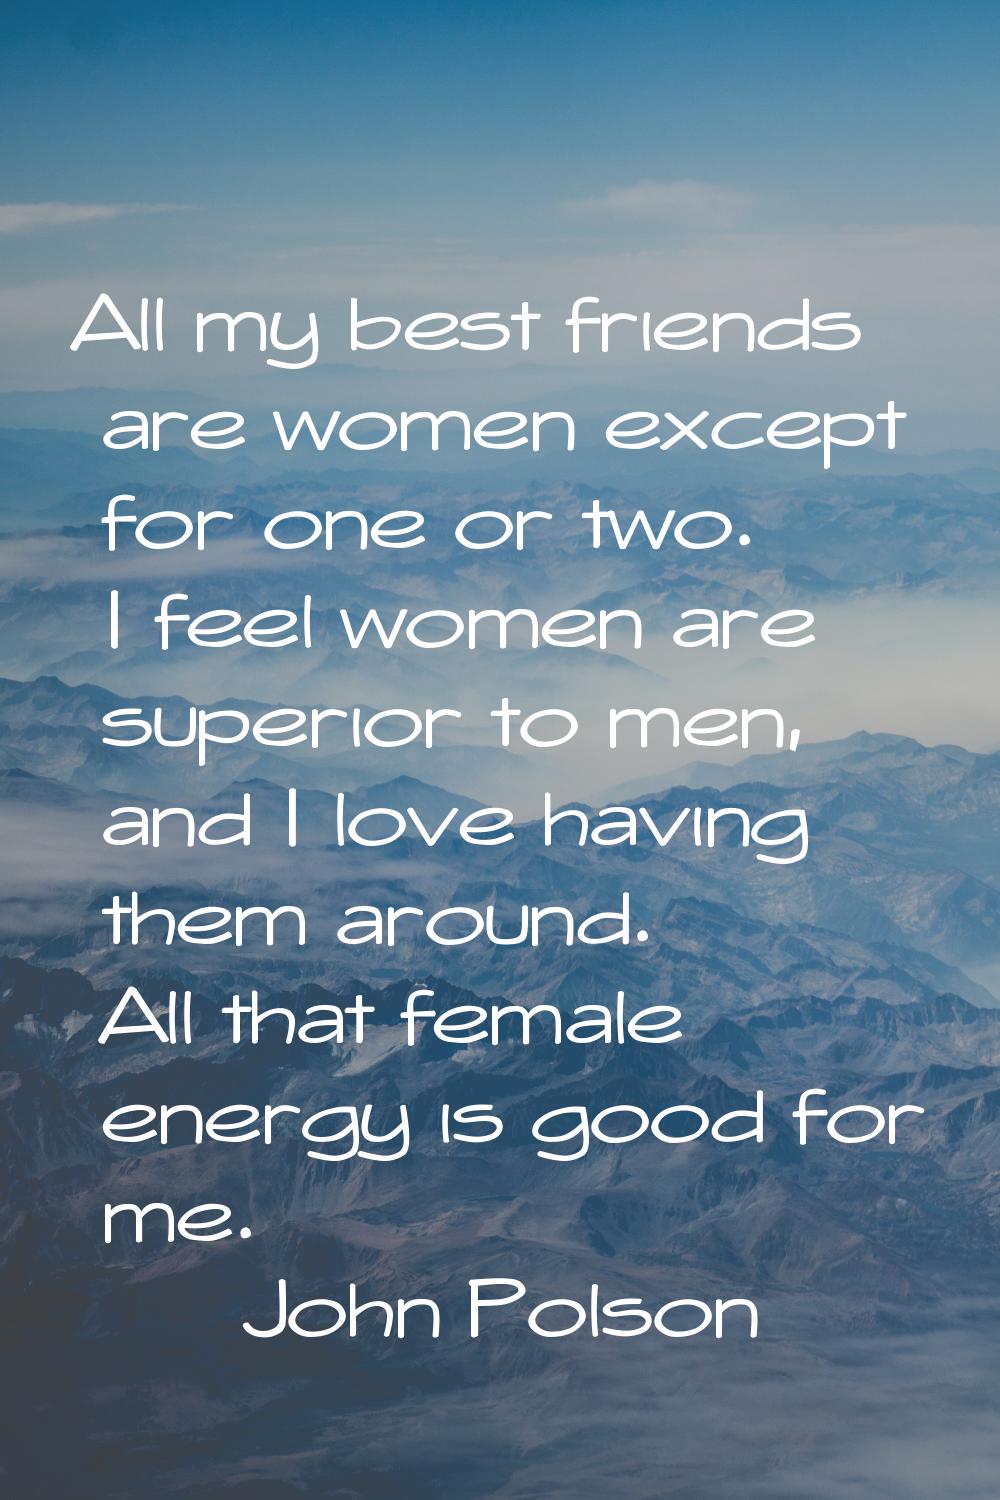 All my best friends are women except for one or two. I feel women are superior to men, and I love h